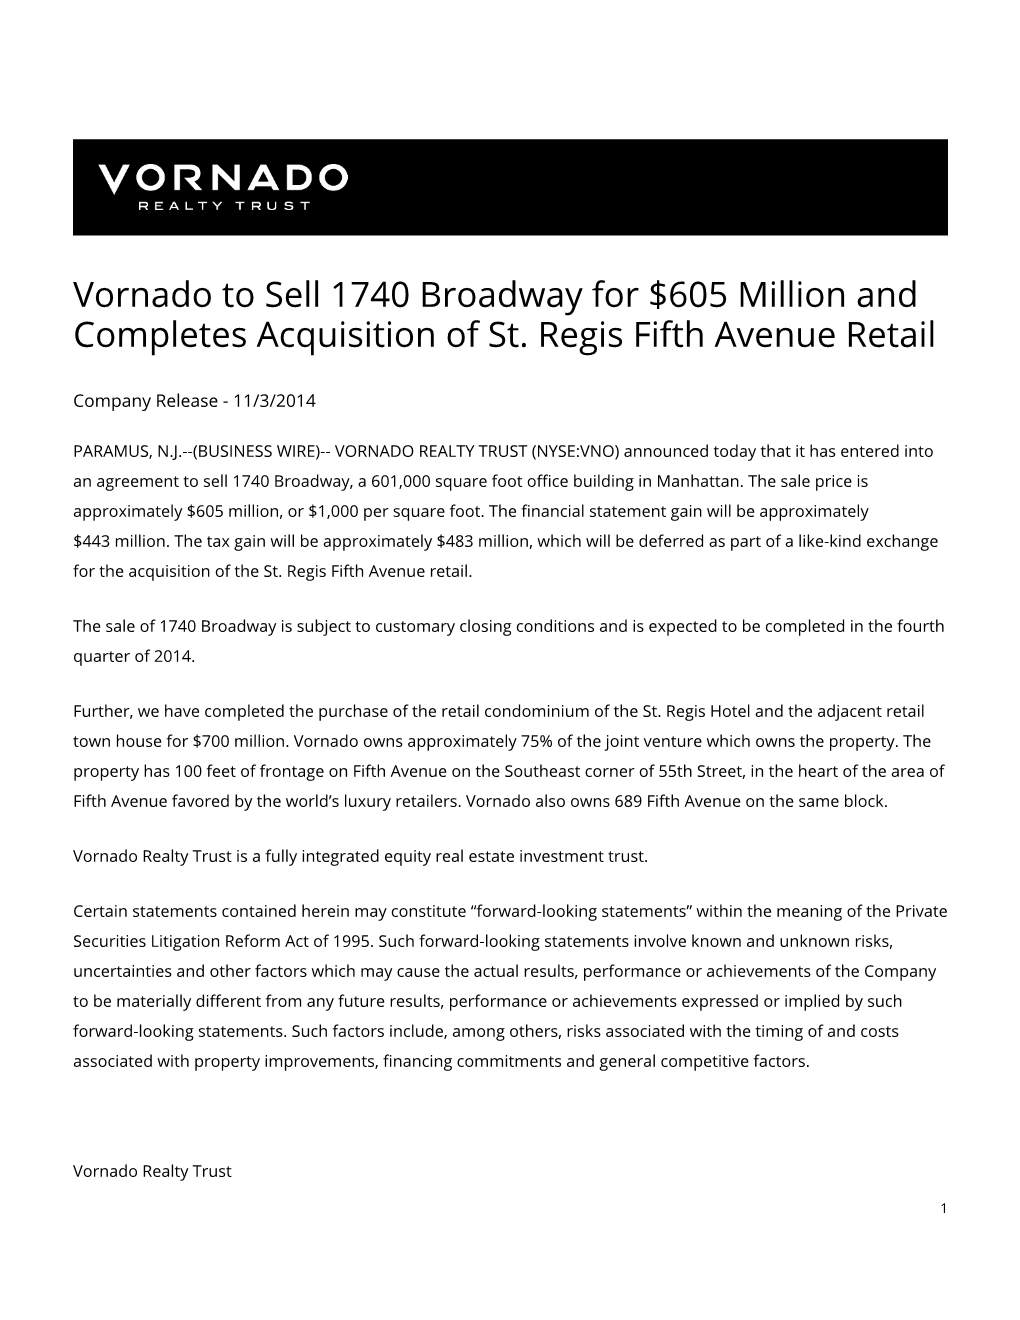 Vornado to Sell 1740 Broadway for $605 Million and Completes Acquisition of St